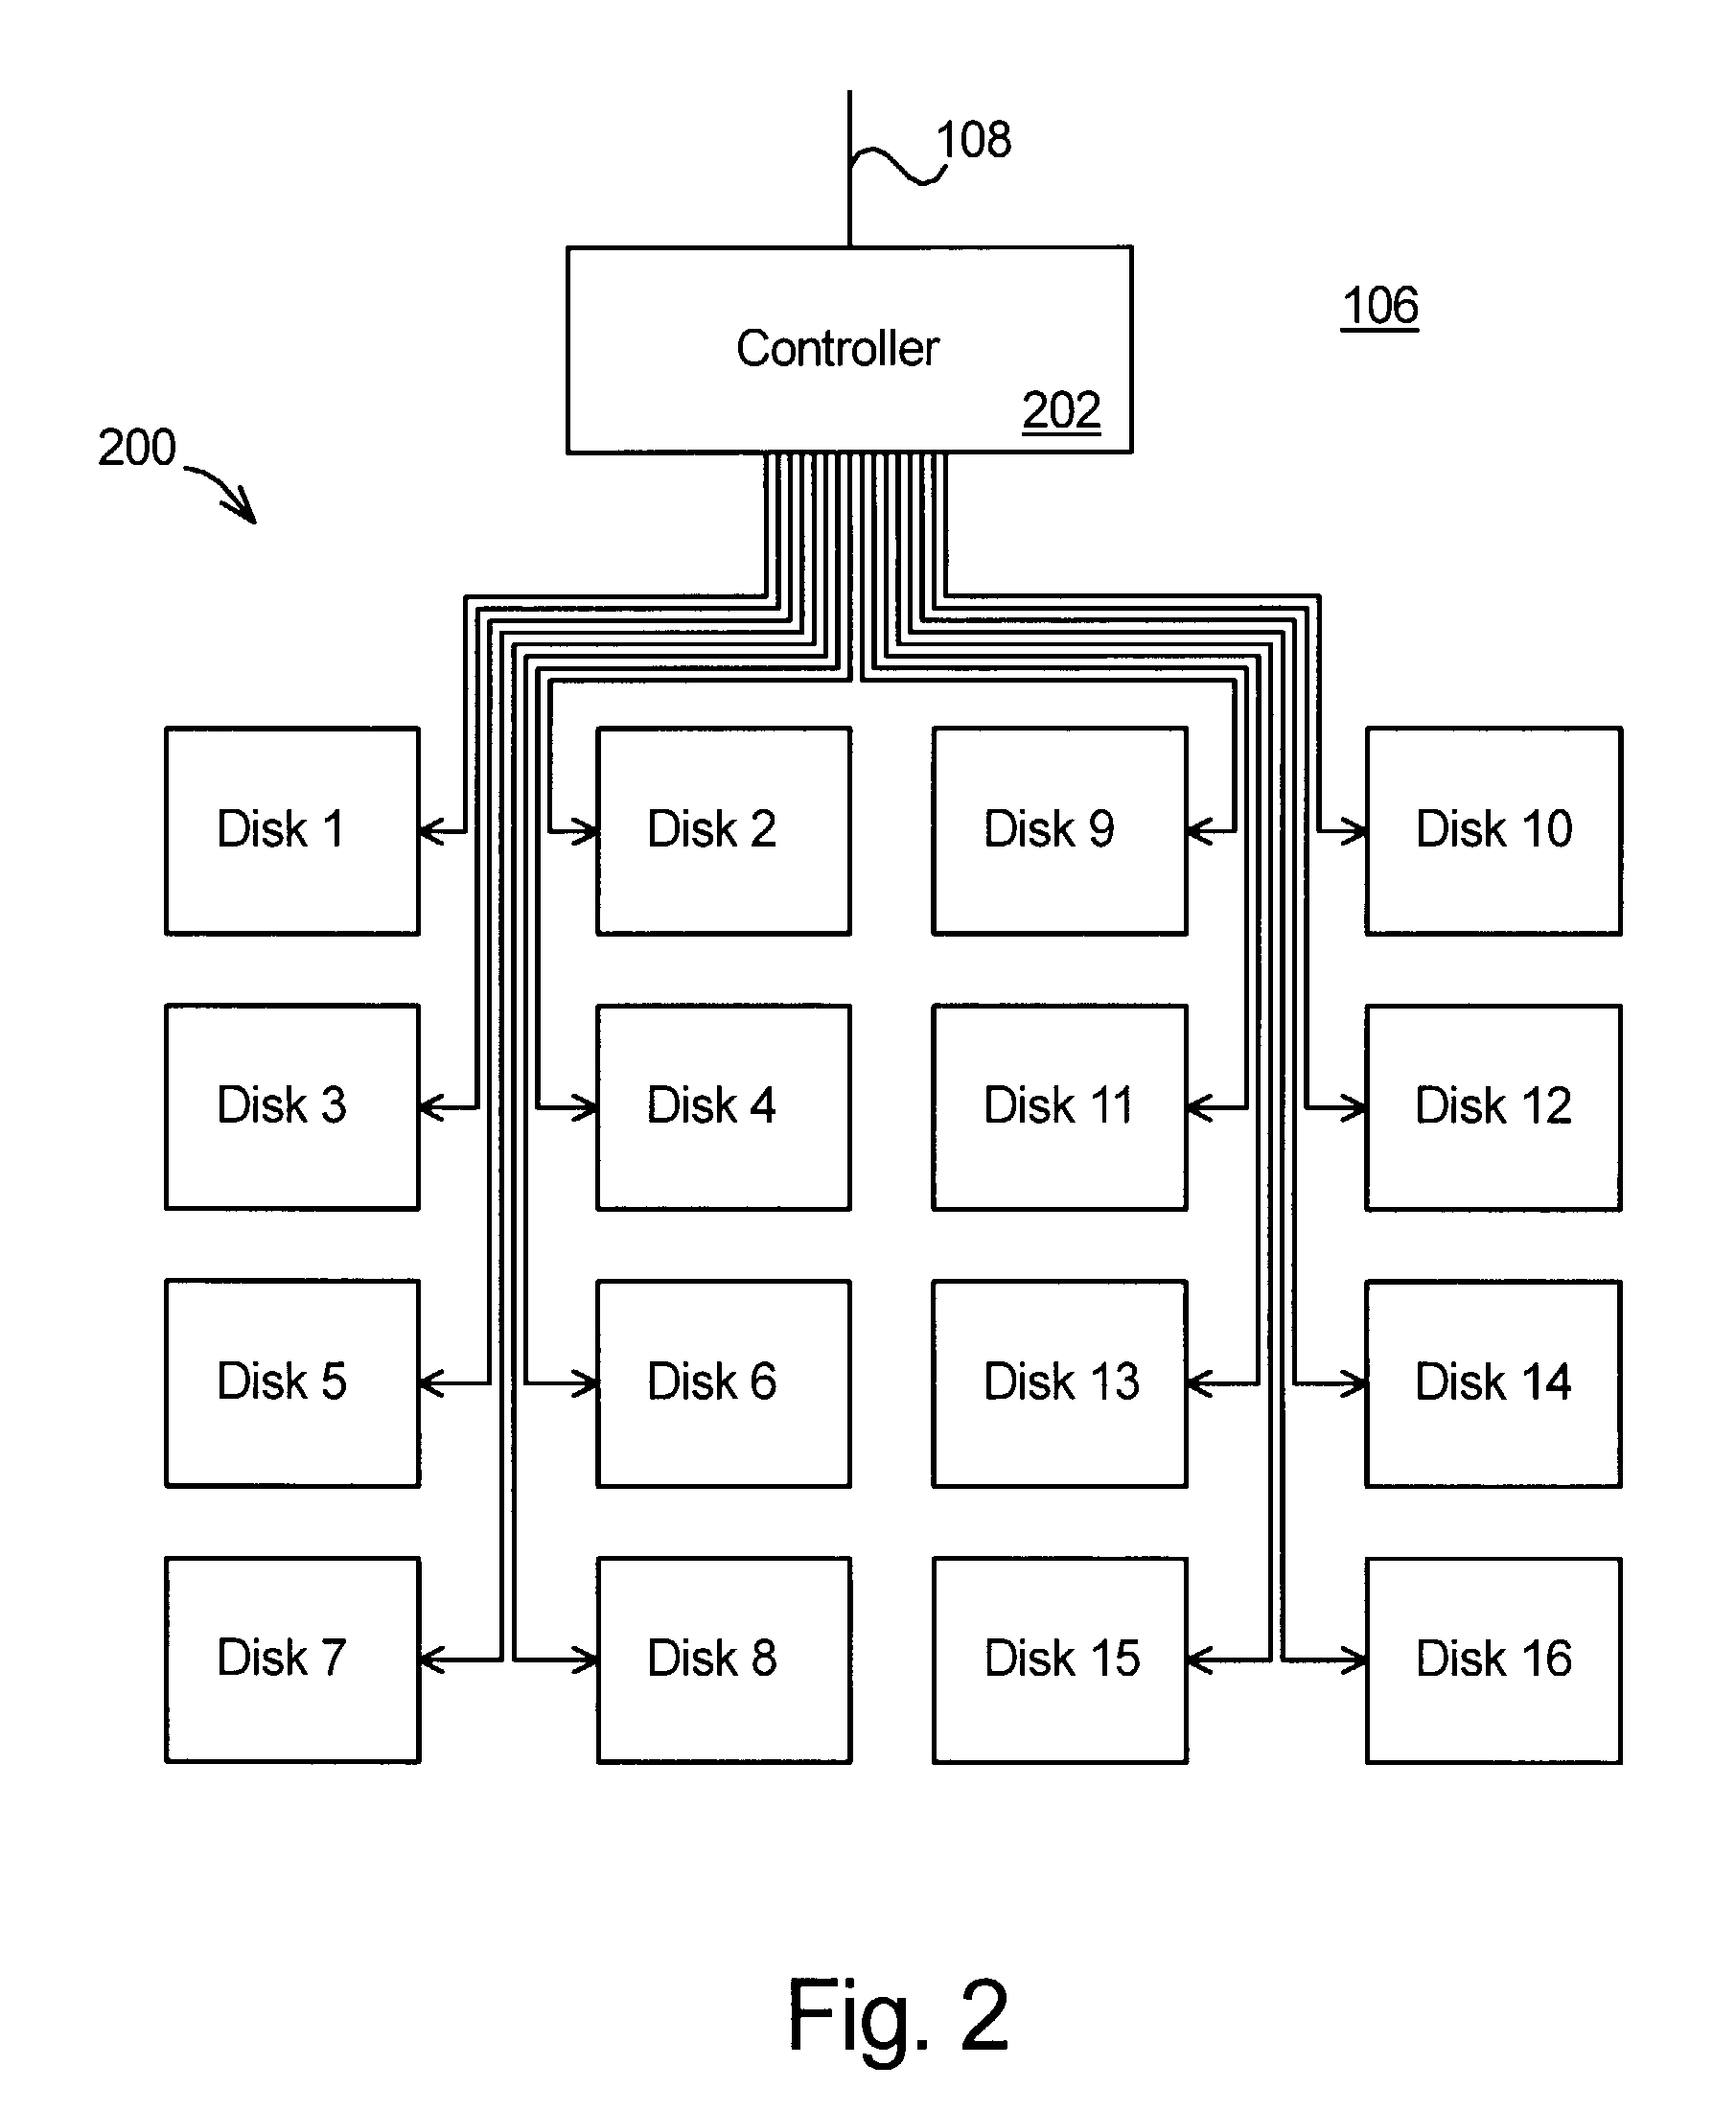 Data storage using disk drives in accordance with a schedule of operations